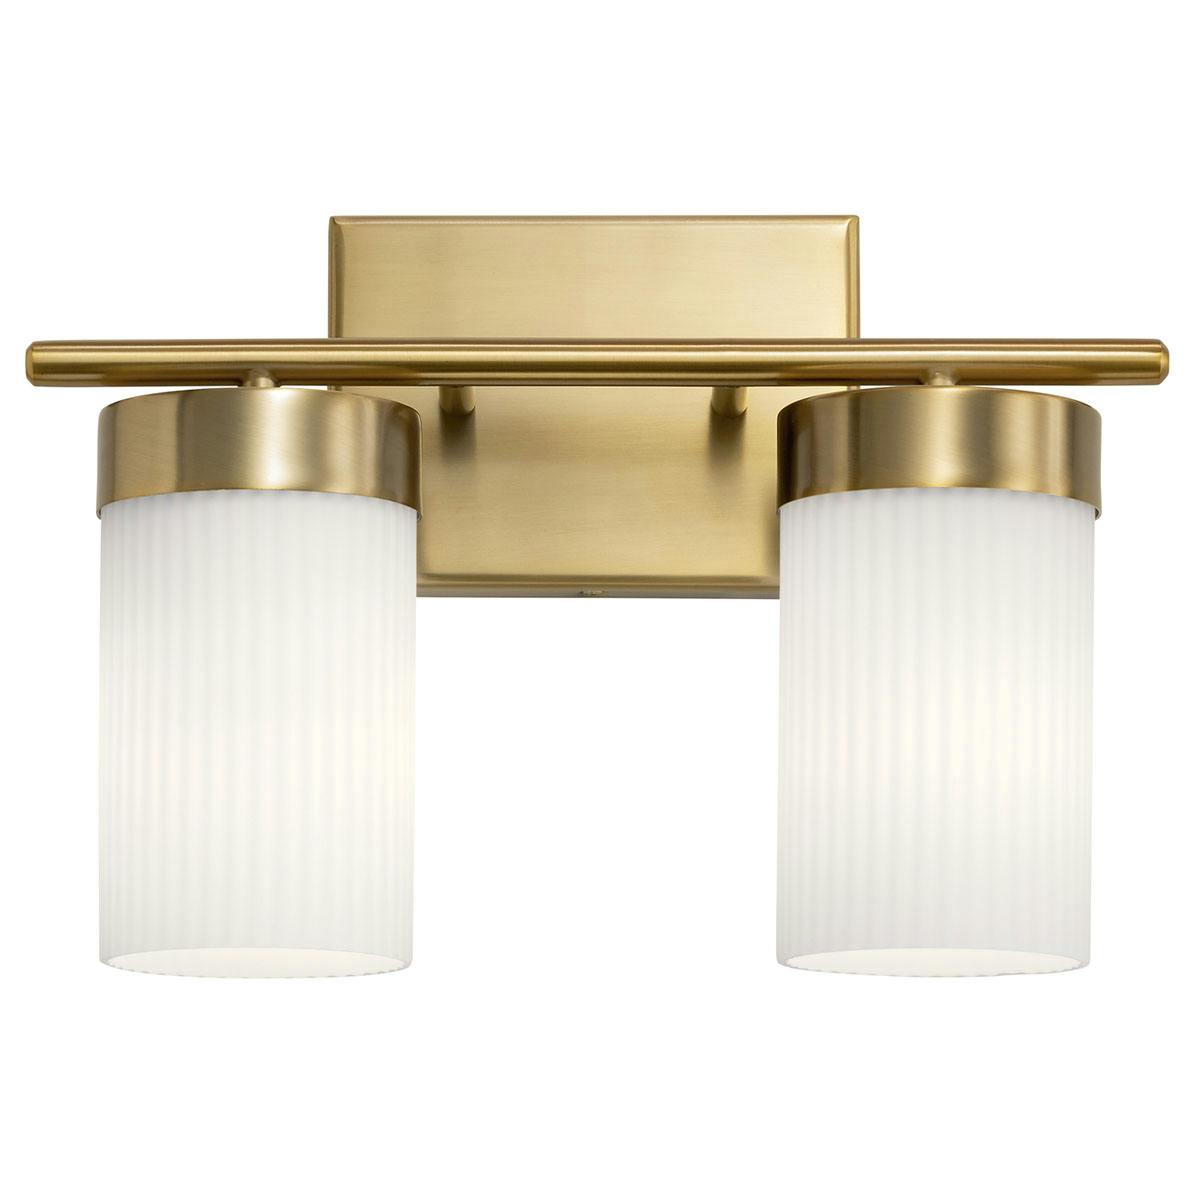 Front view of the Ciona 14.5" 2 Light Vanity Lighte Brass on a white background